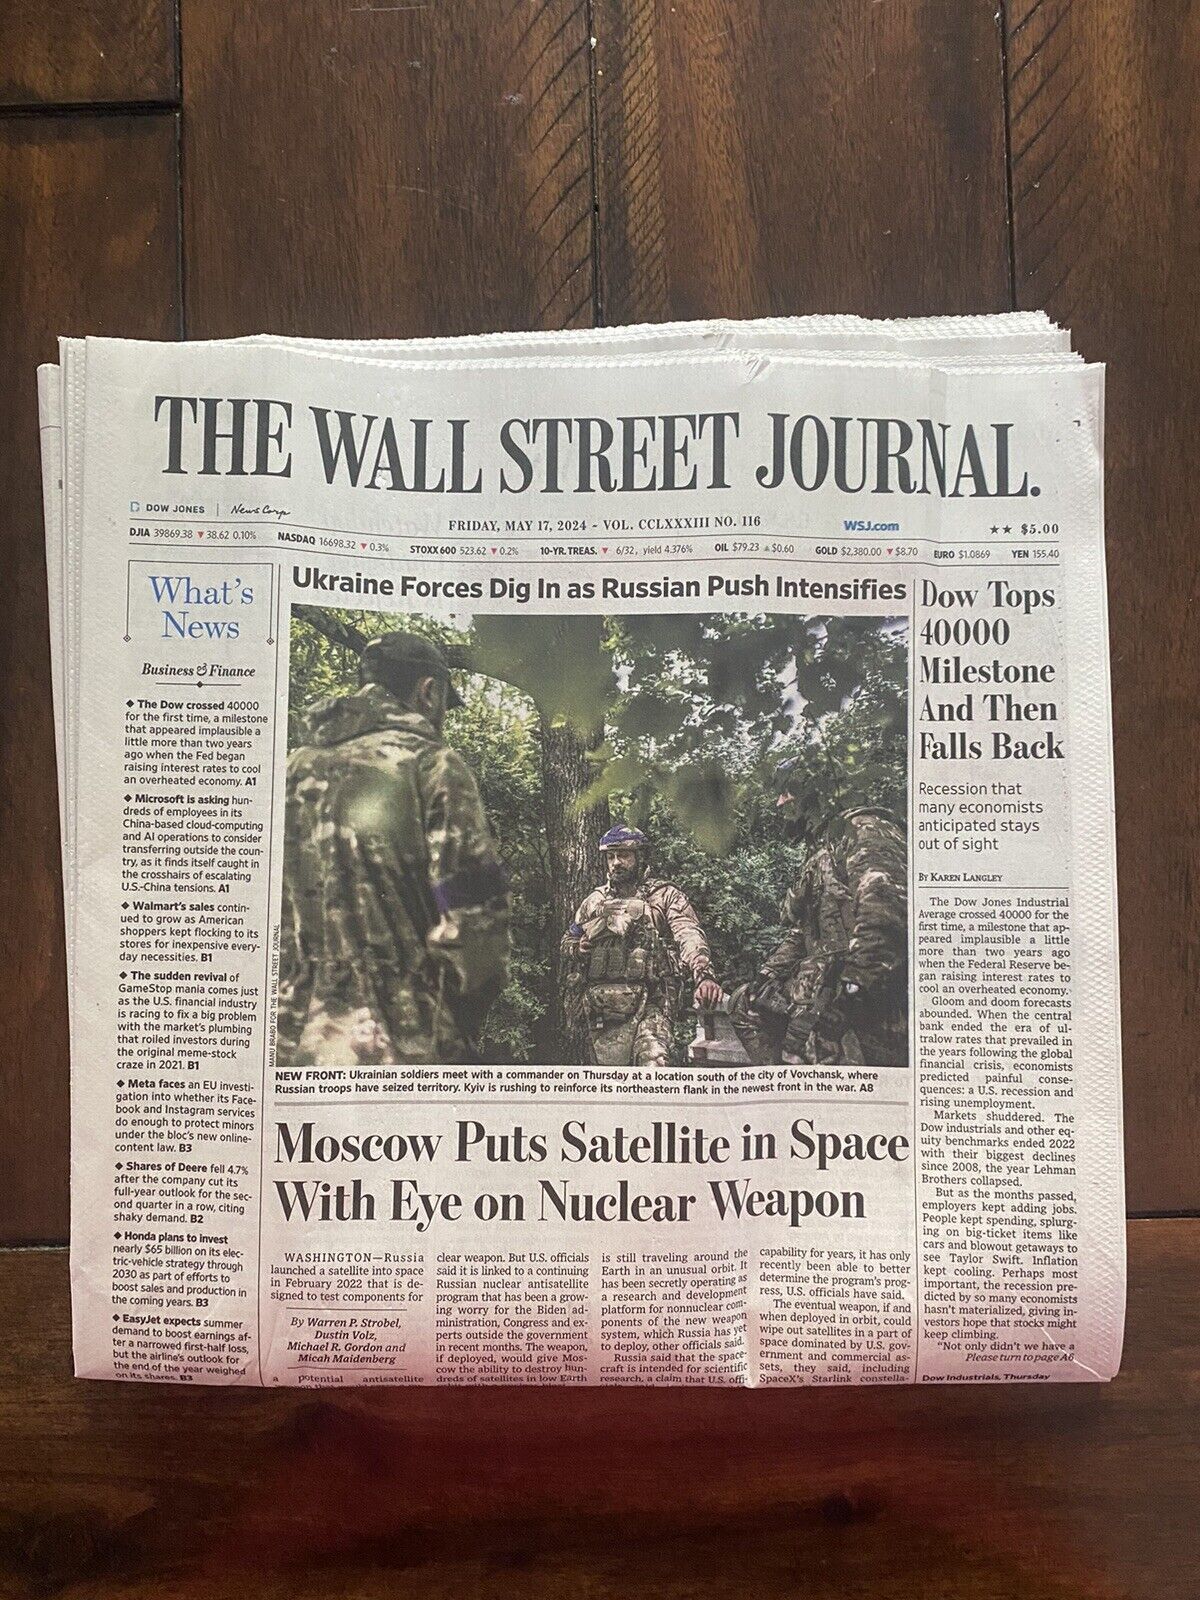 The Wall Street Journal Friday, May 17, 2024 Complete Print Newspaper (NEW)